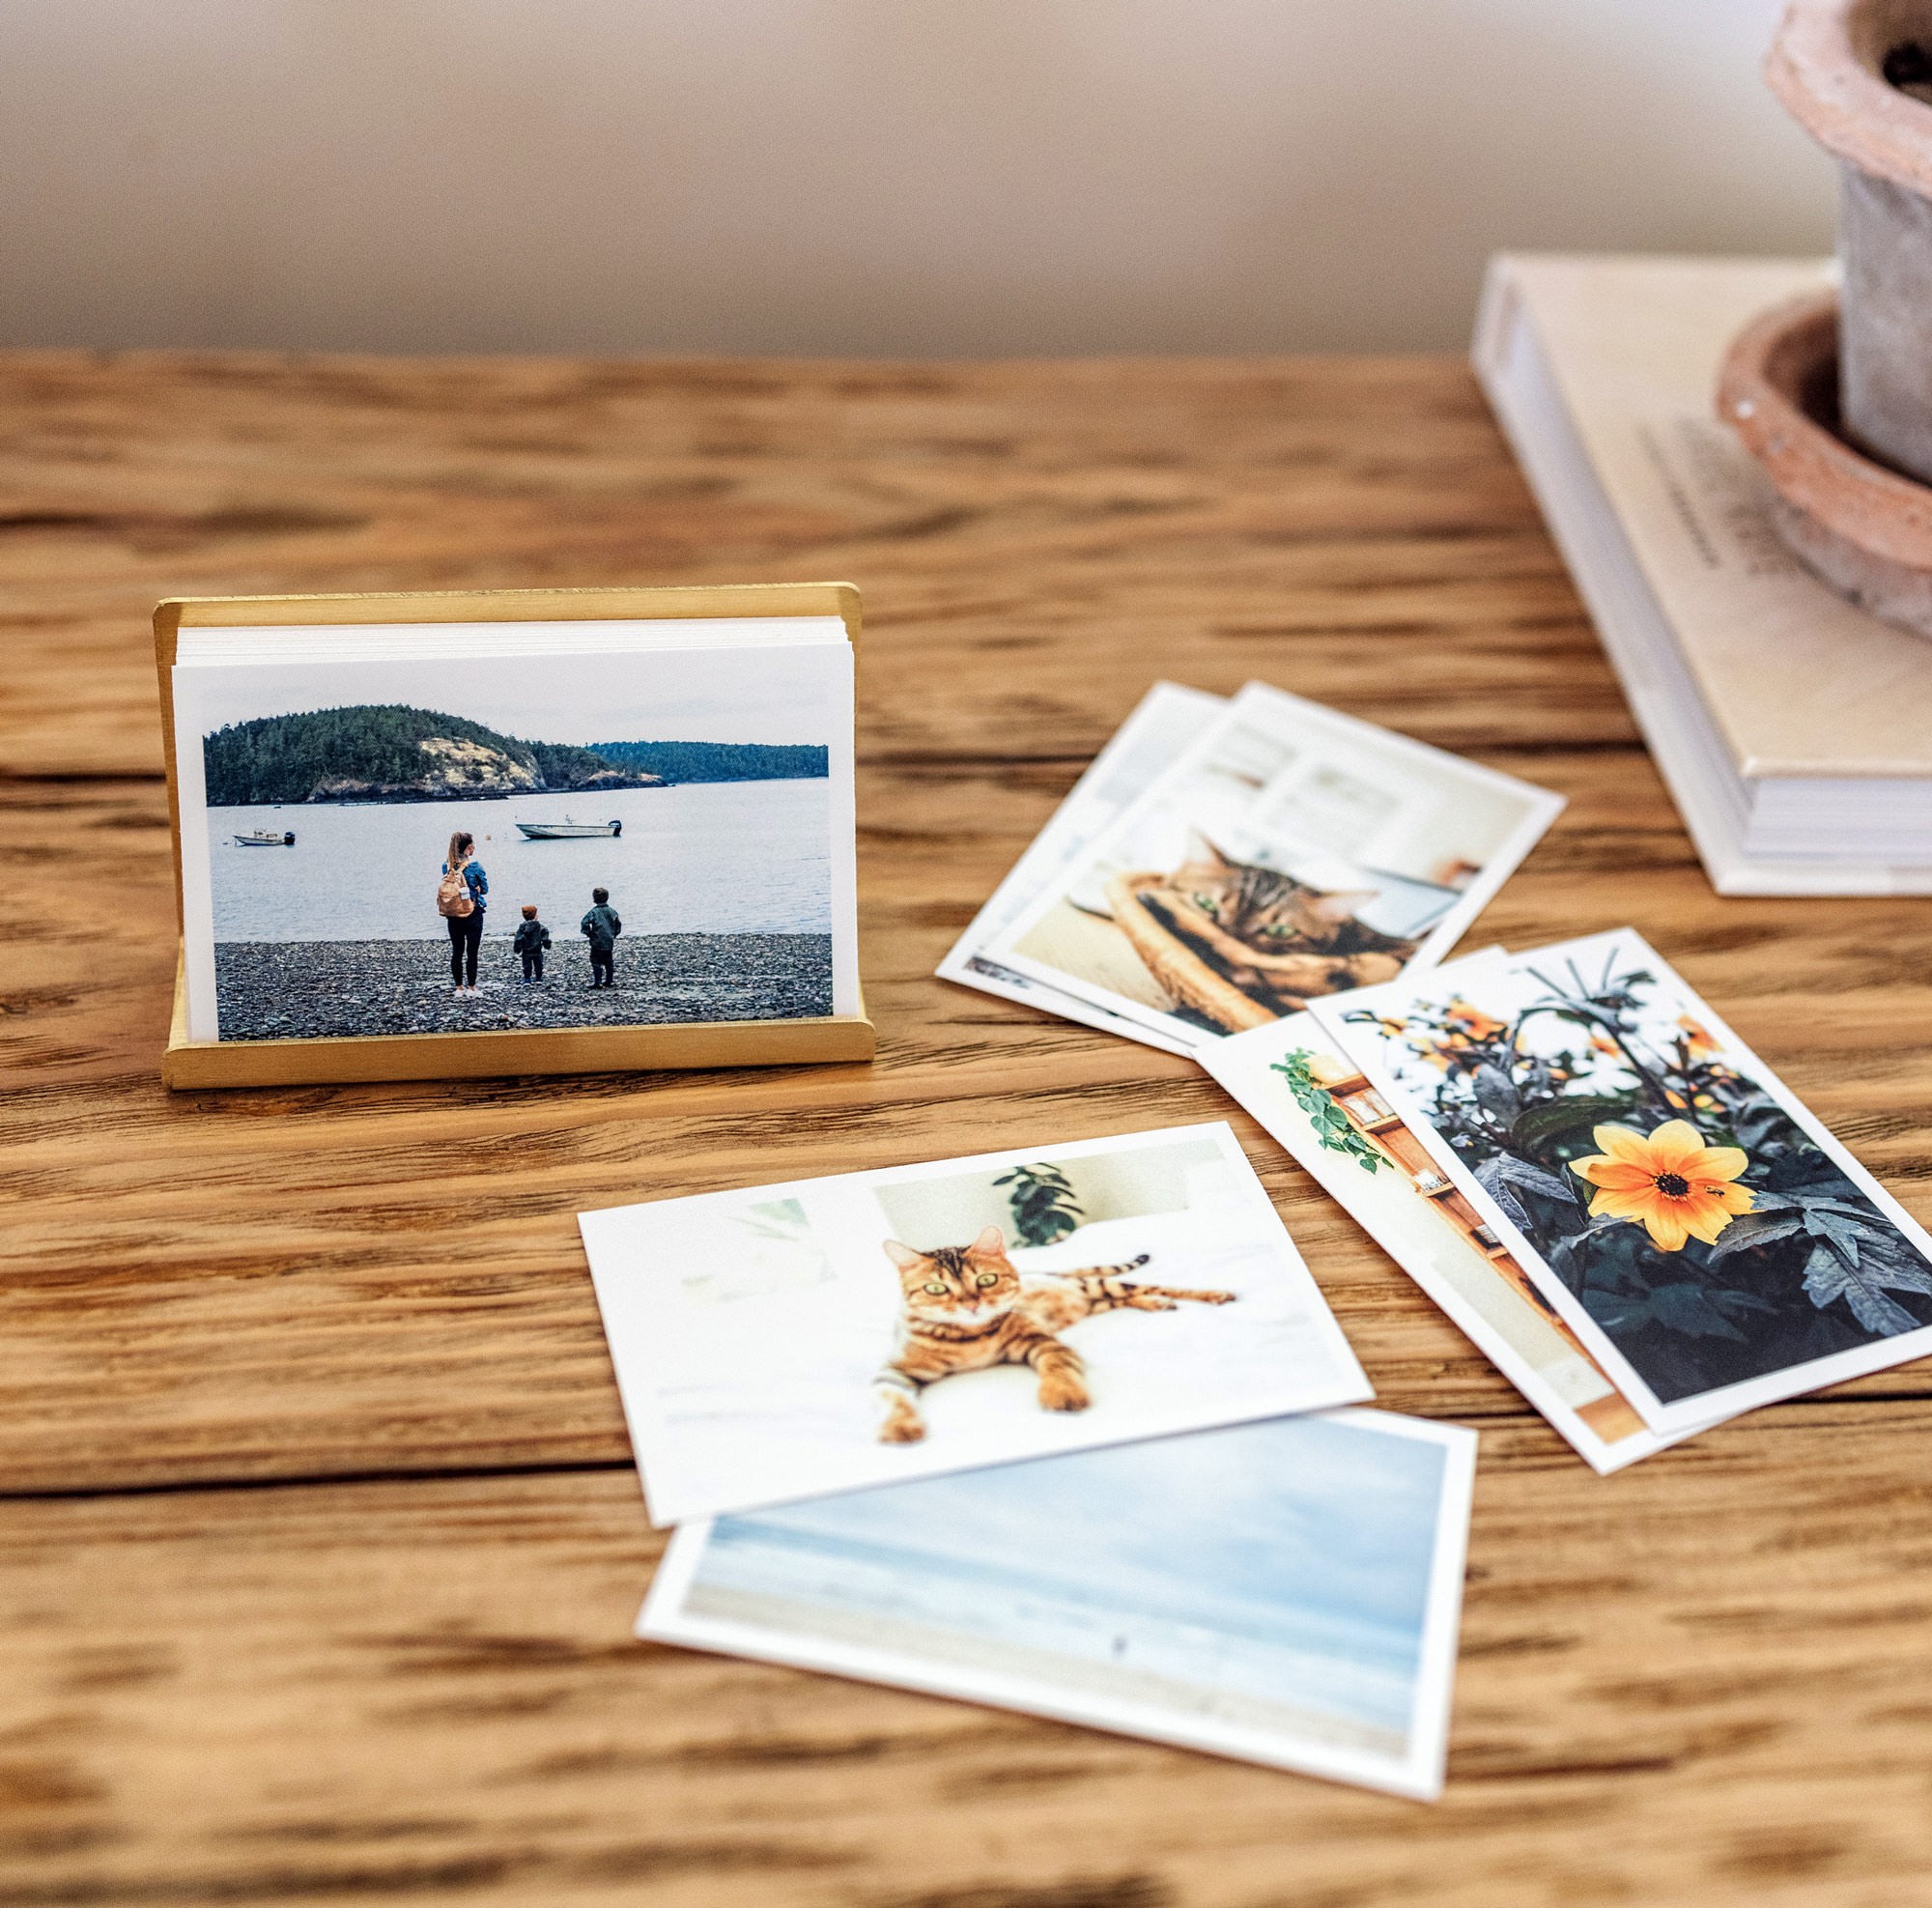 Mini photo album for Instax photo - Wallet size photo album - Personalized  gift for friends